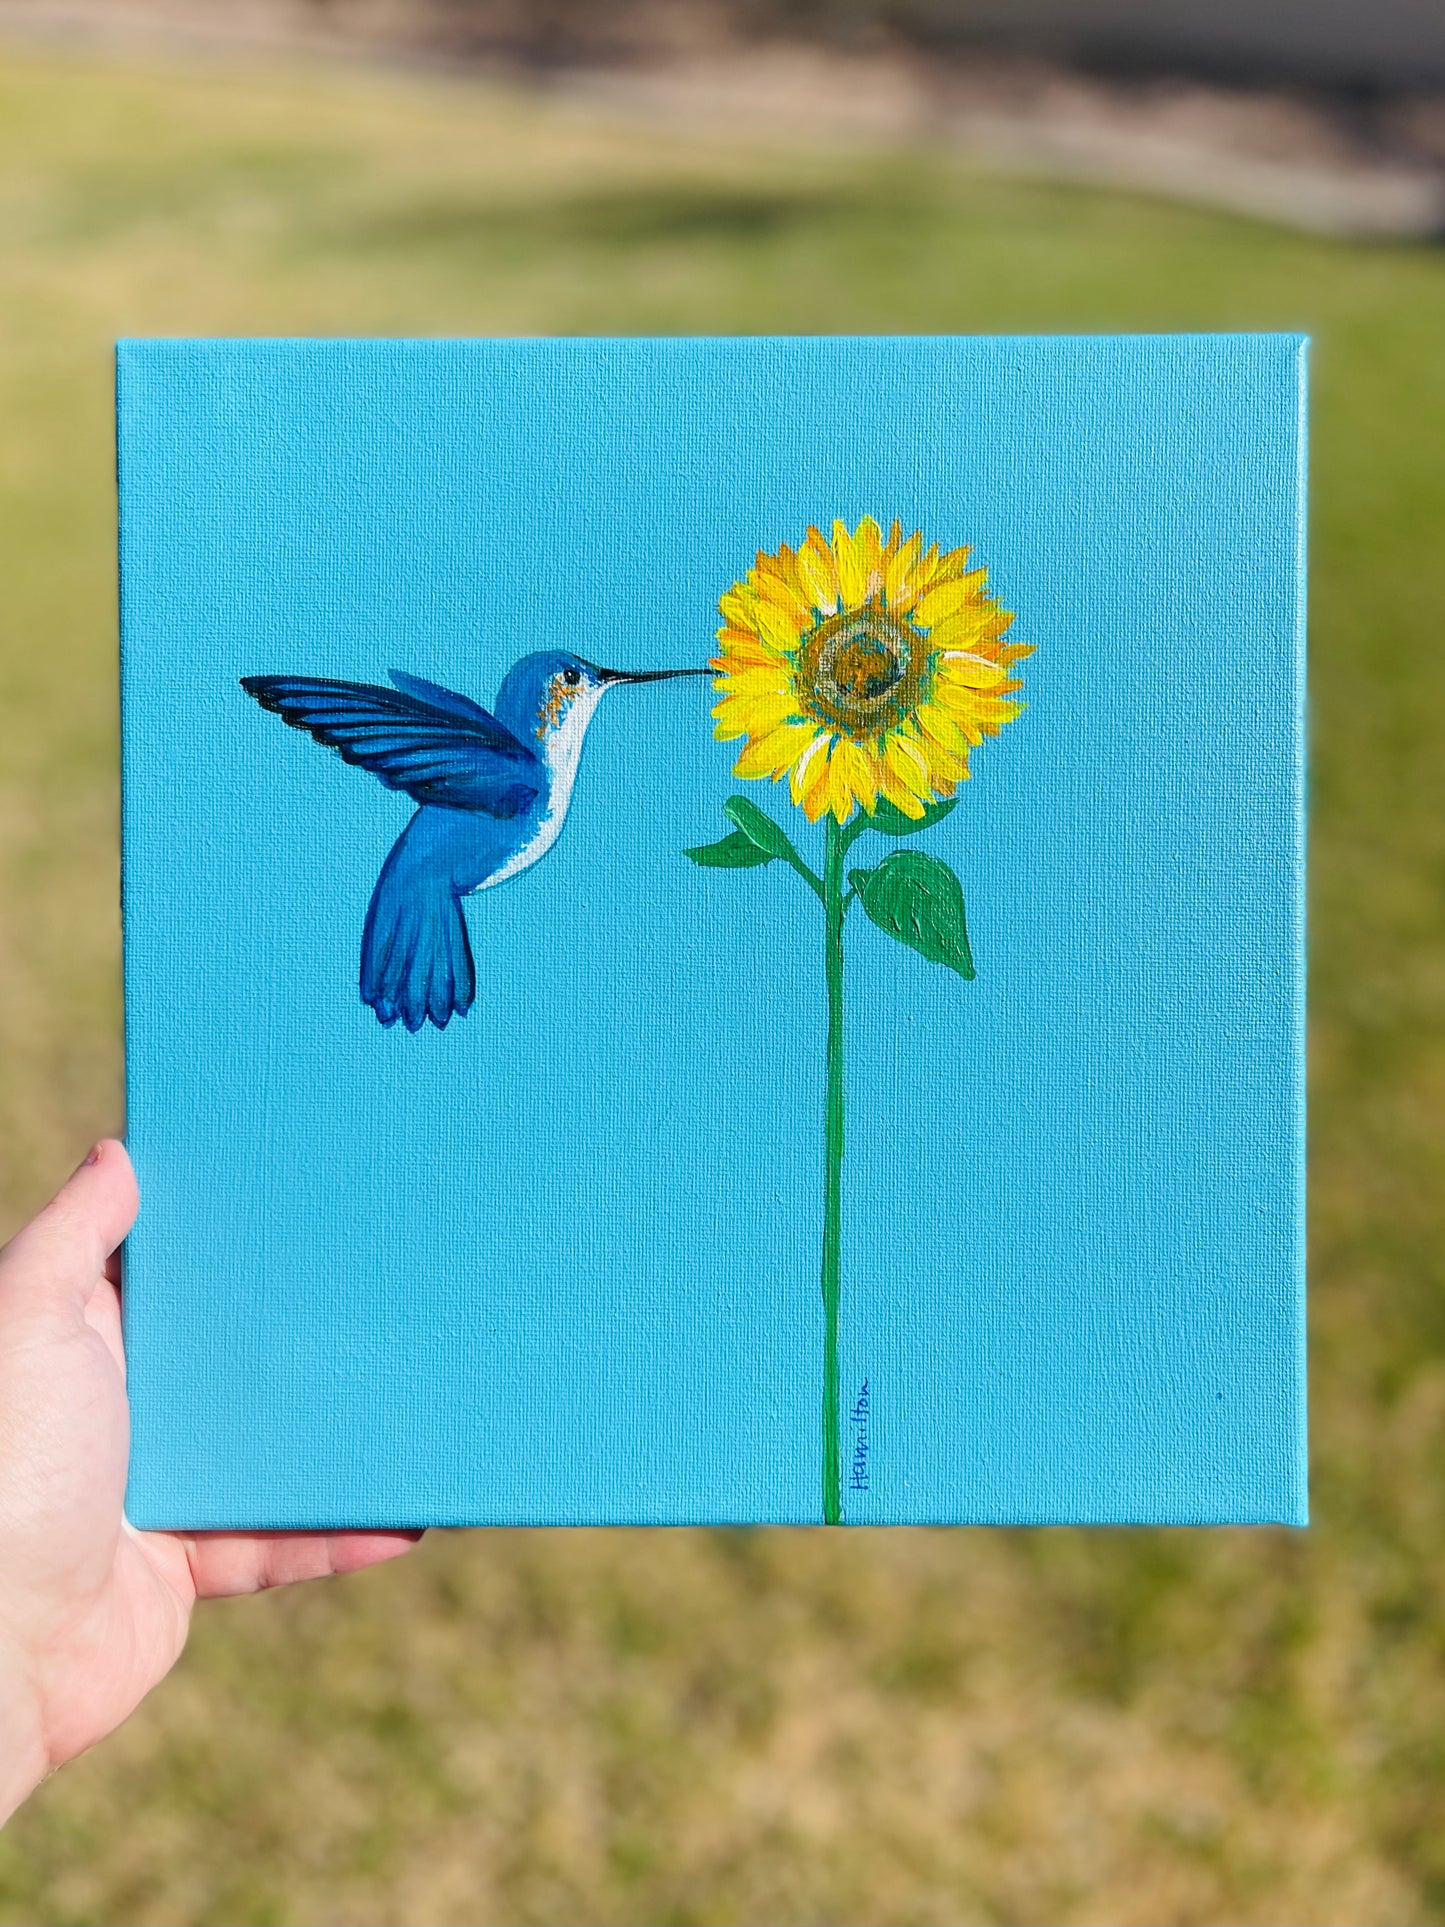 Love Notes: Hummingbird with sunflower